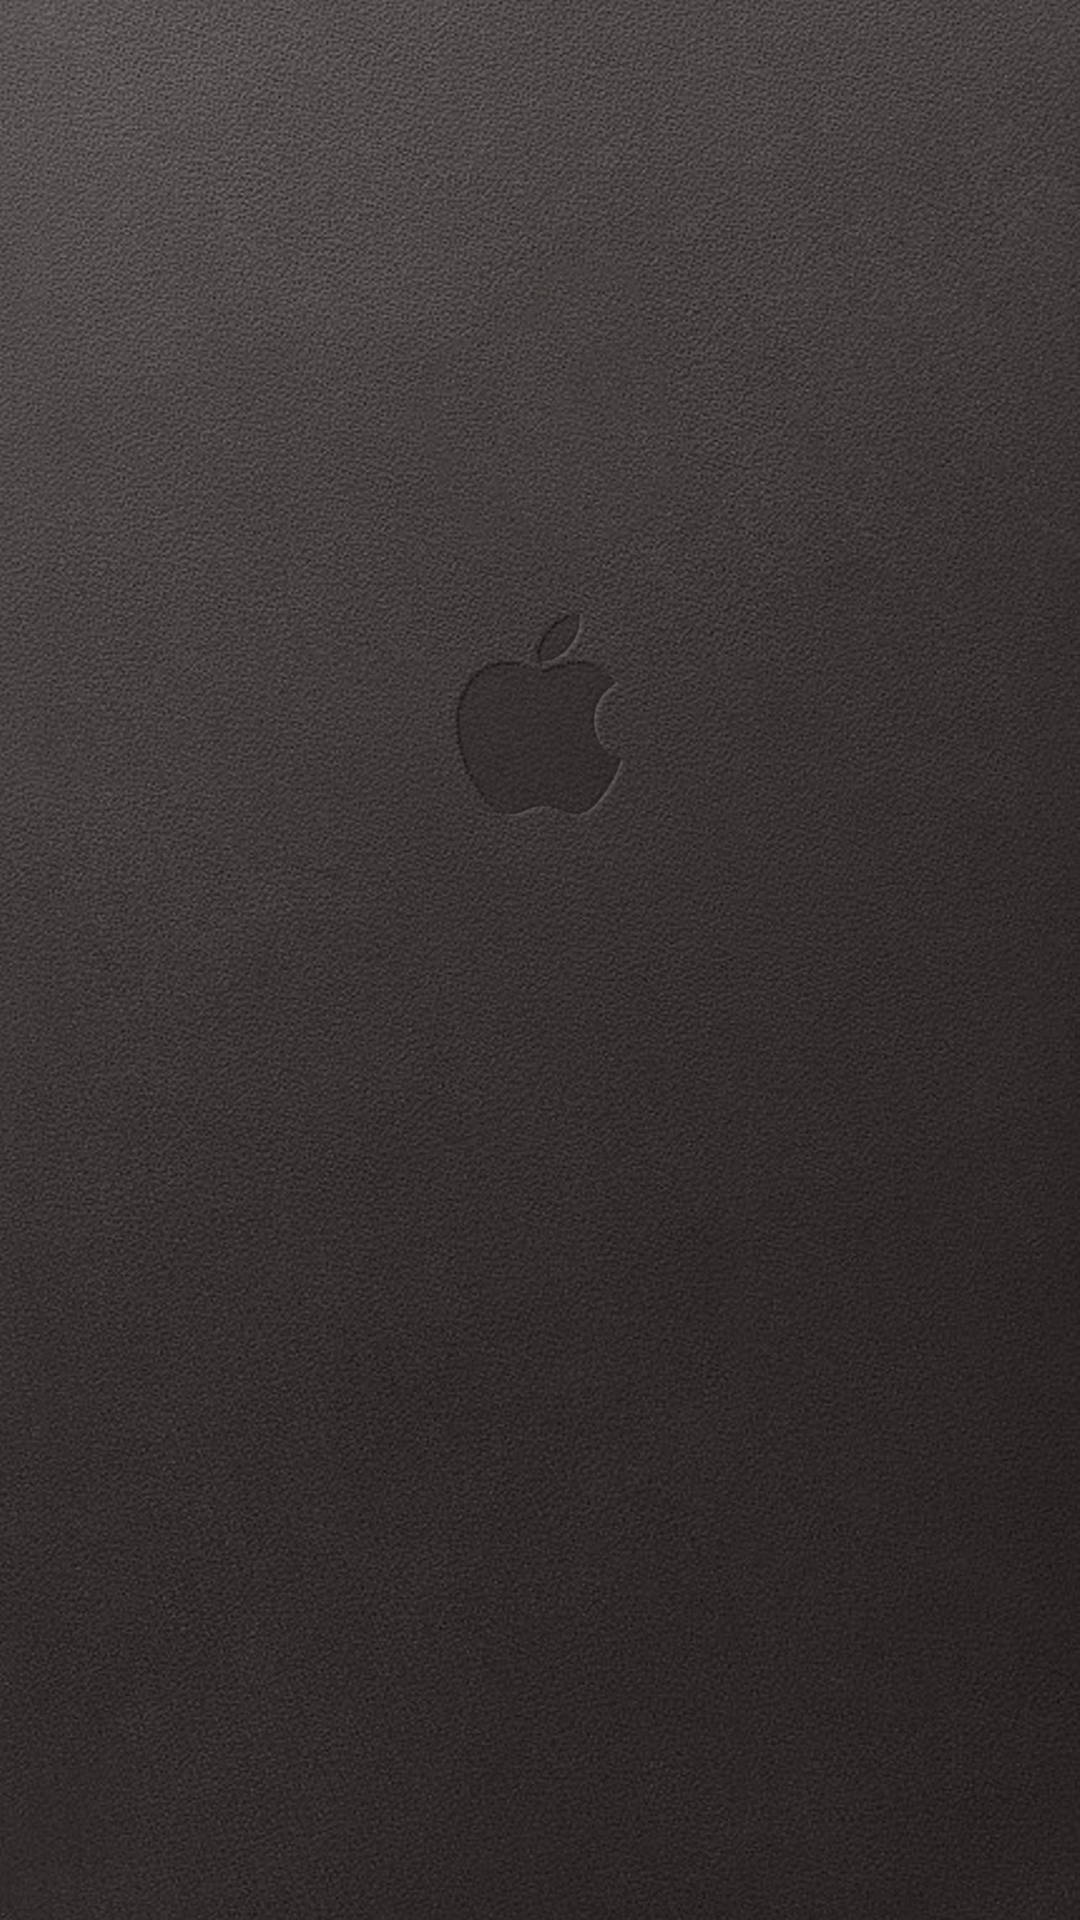 Apple Logo On Black Leather Iphone Picture